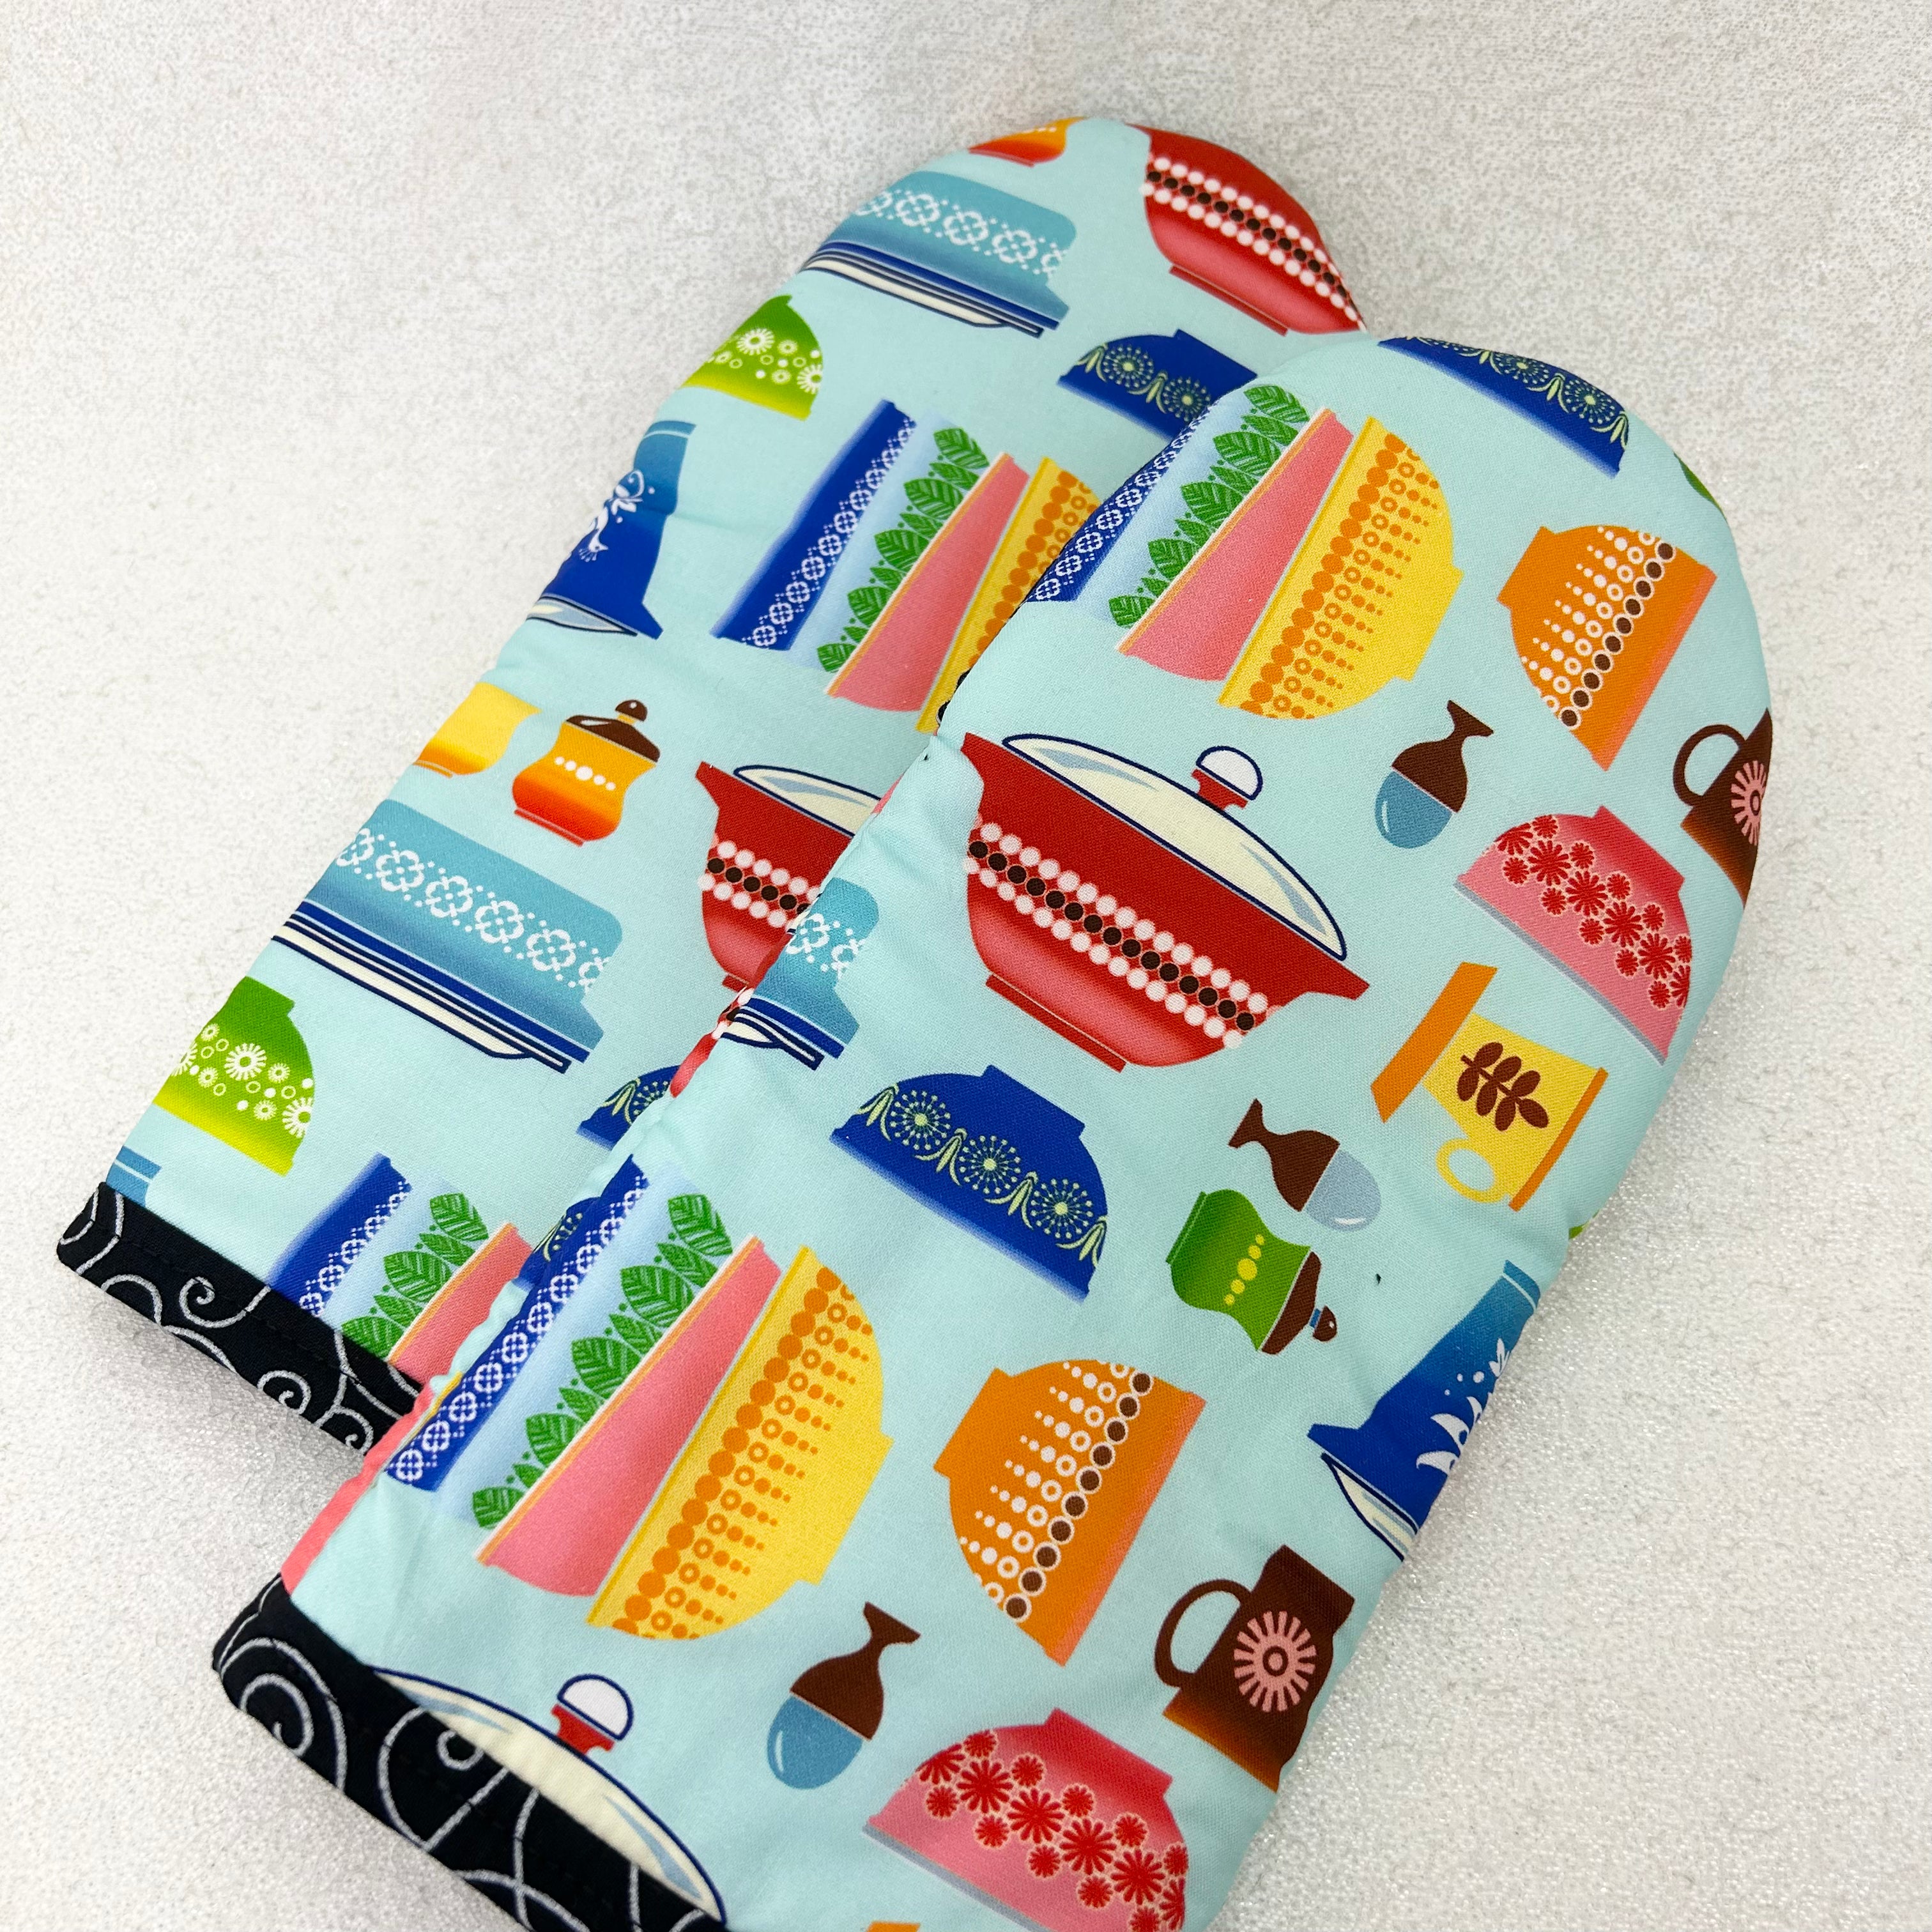 Oven Mitts: Vintage Pyrex